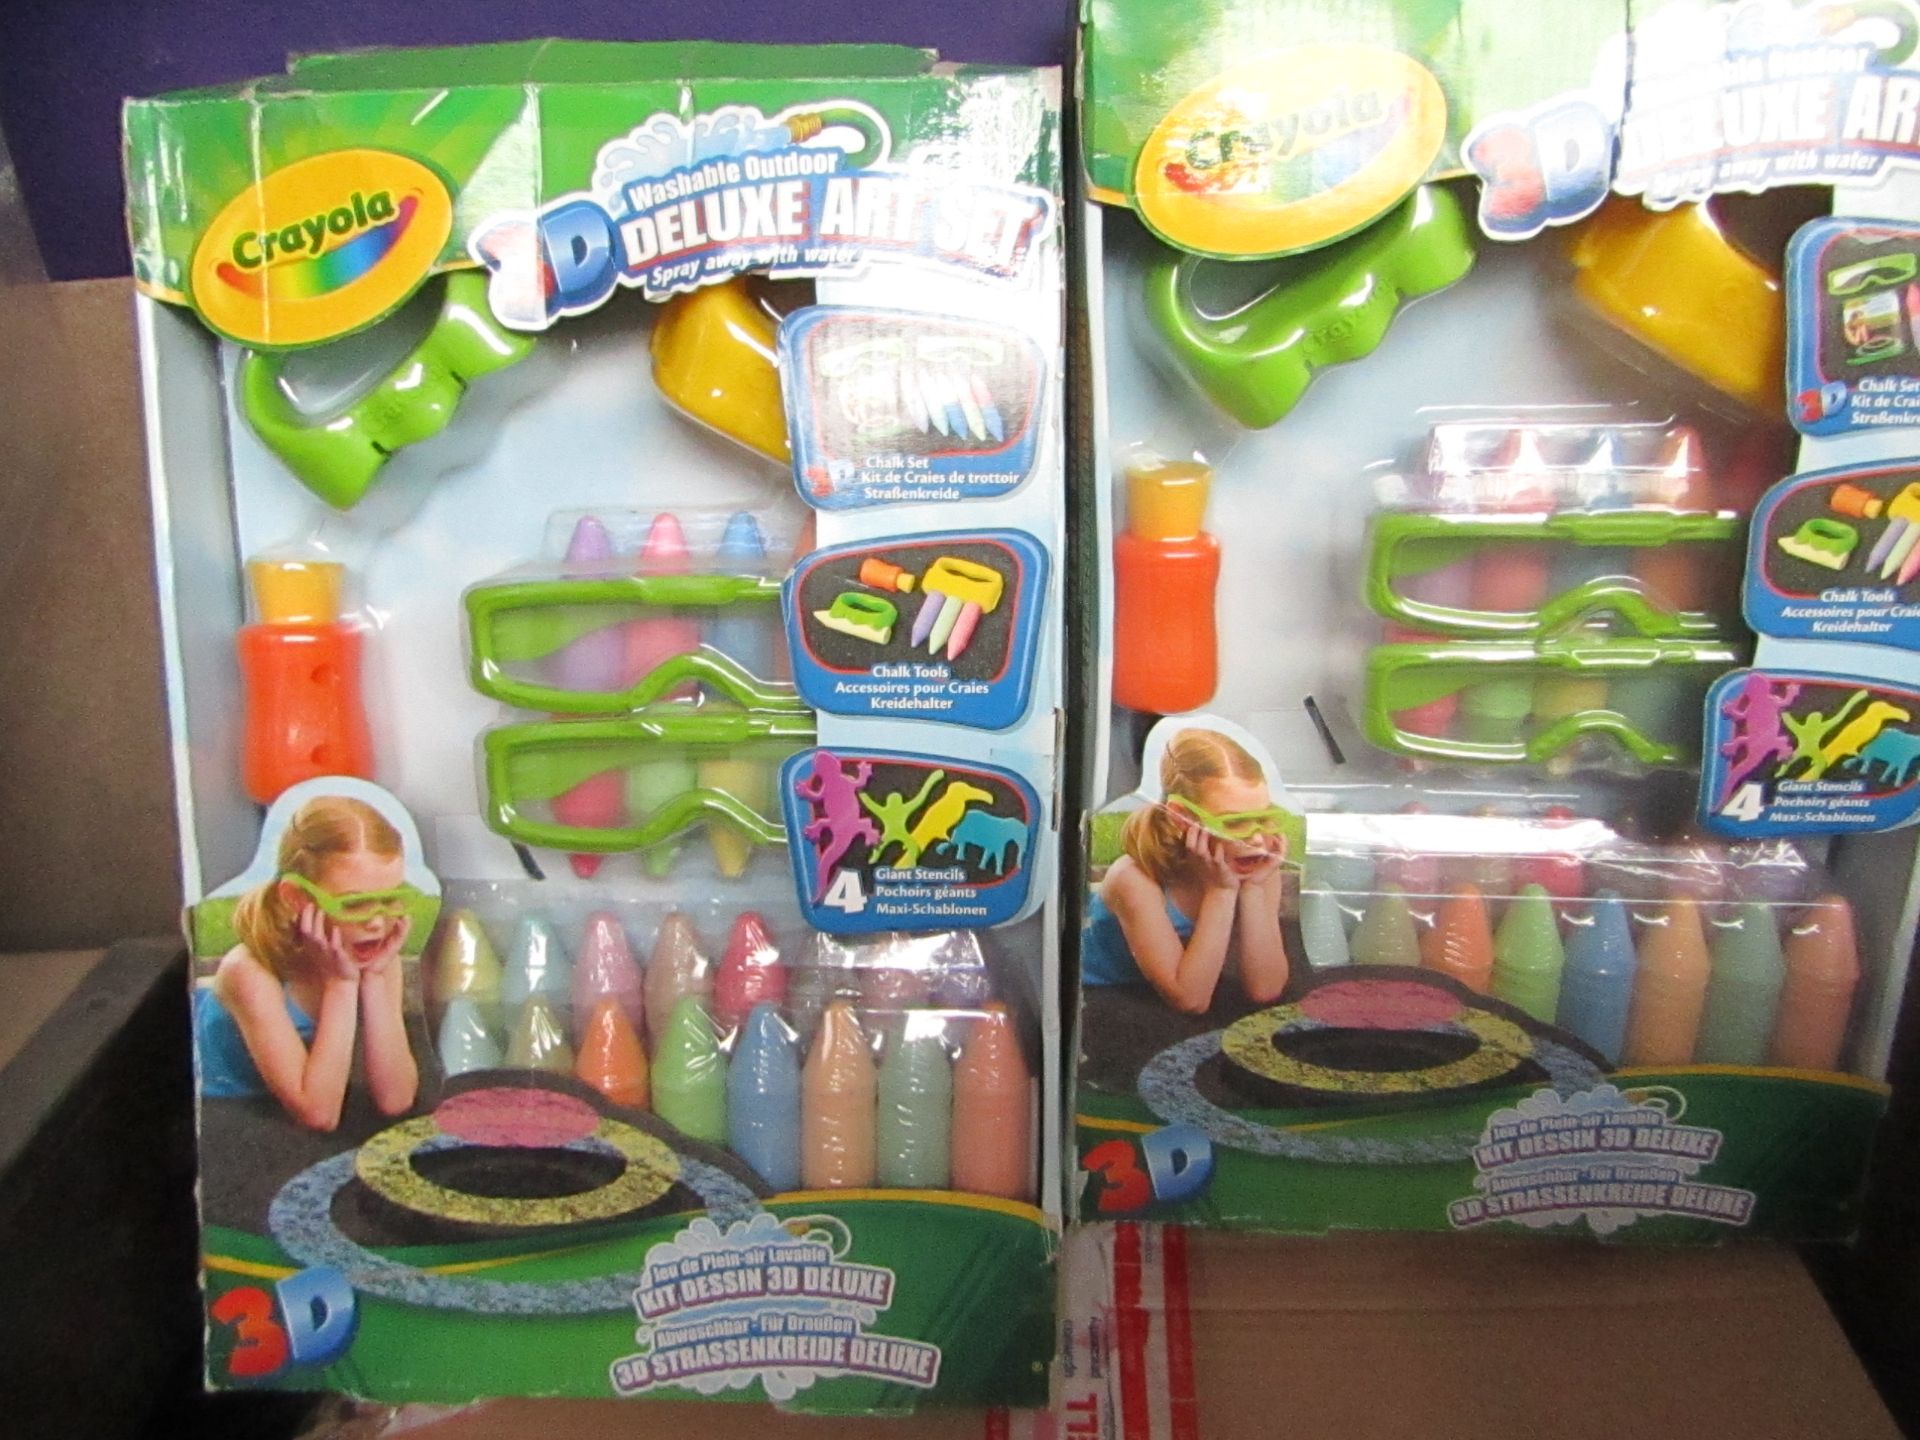 2 x Crayola 3D Deluxe Art Sets.New & Packaged.RRP £12.49 each on ebay